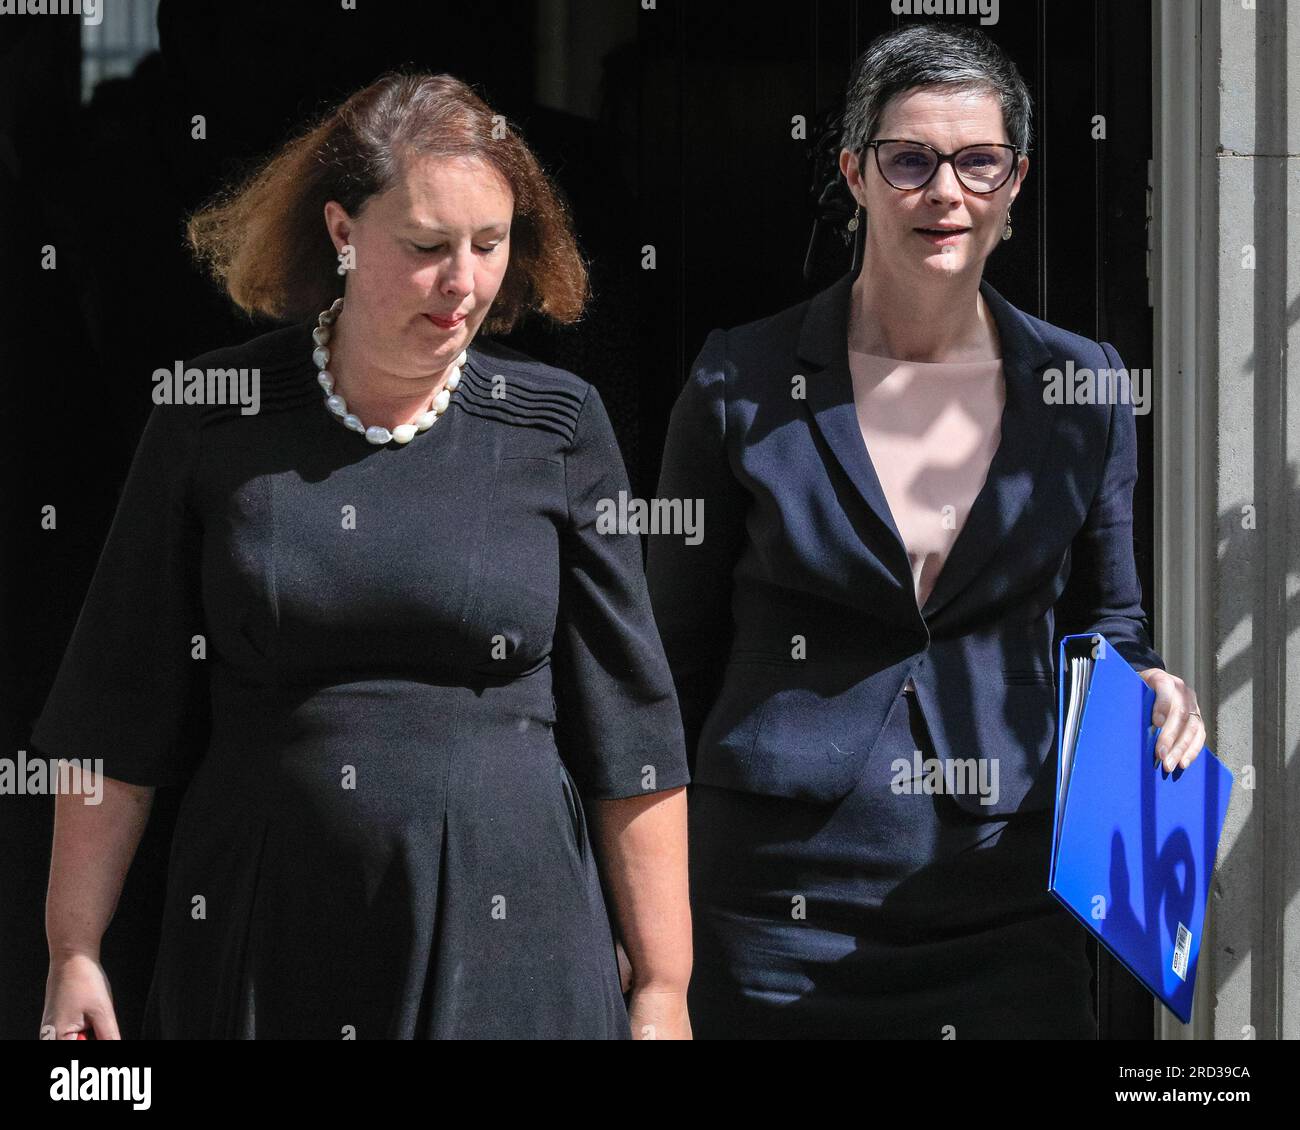 London, UK. 18th July, 2023. Victoria Prentis, MP, Attorney General and Chloe Smith, acting Secretary of State for Science and Technology. Ministers and British Conservative Party politicians in the Sunak government arrive for the weekly cabinet meeting. This will likely be the last cabinet before the Parliamentary recess. Credit: Imageplotter/Alamy Live News Stock Photo